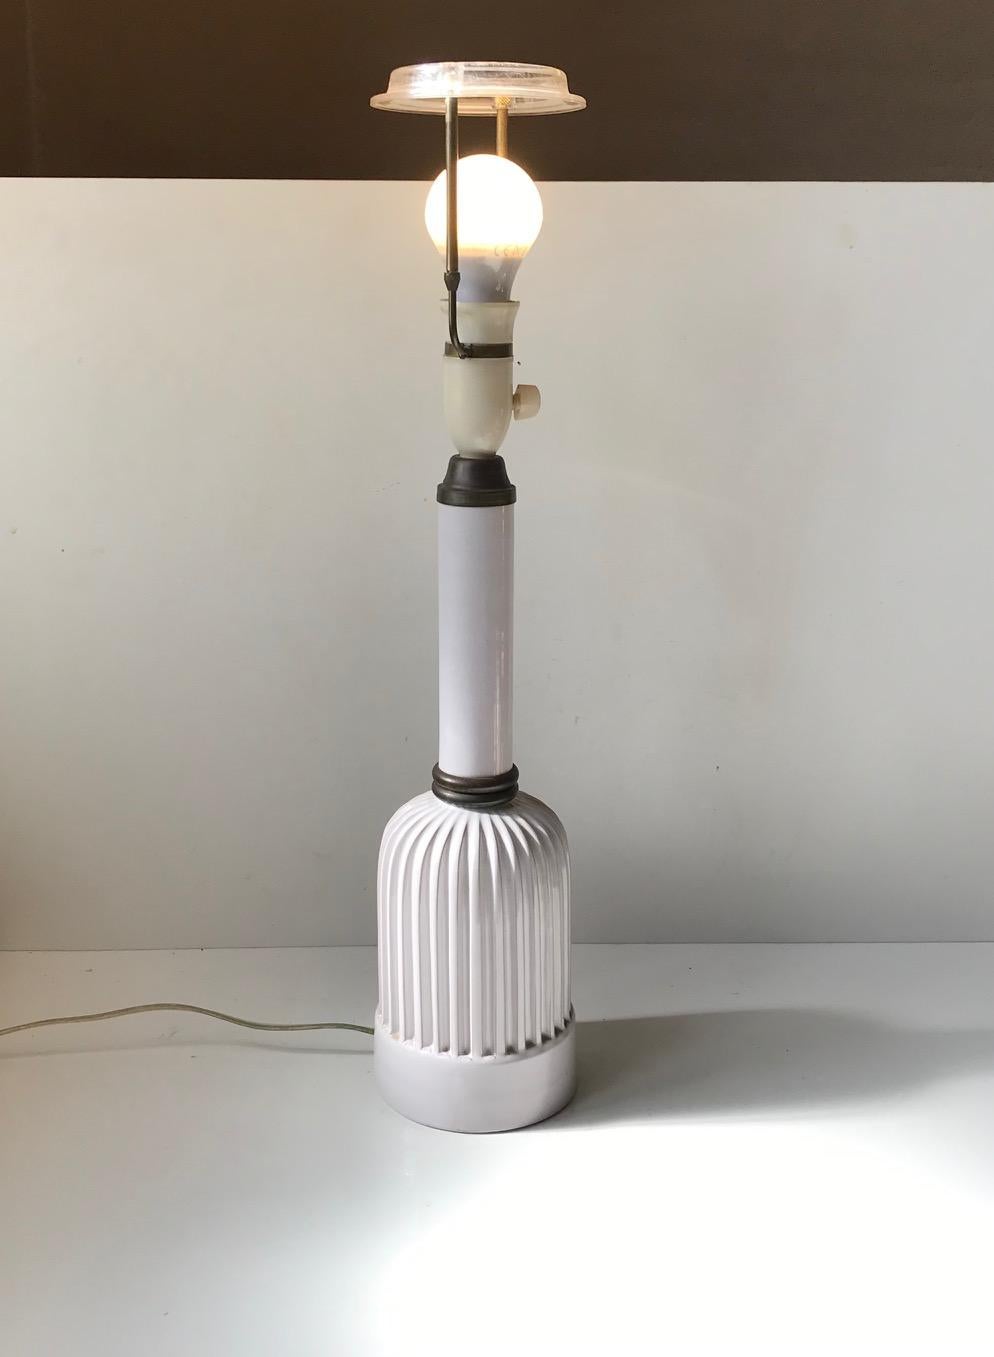 Danish Art Deco Table Lamp in White Glazed Ceramic by Christian Schollert, 1940s In Good Condition For Sale In Esbjerg, DK